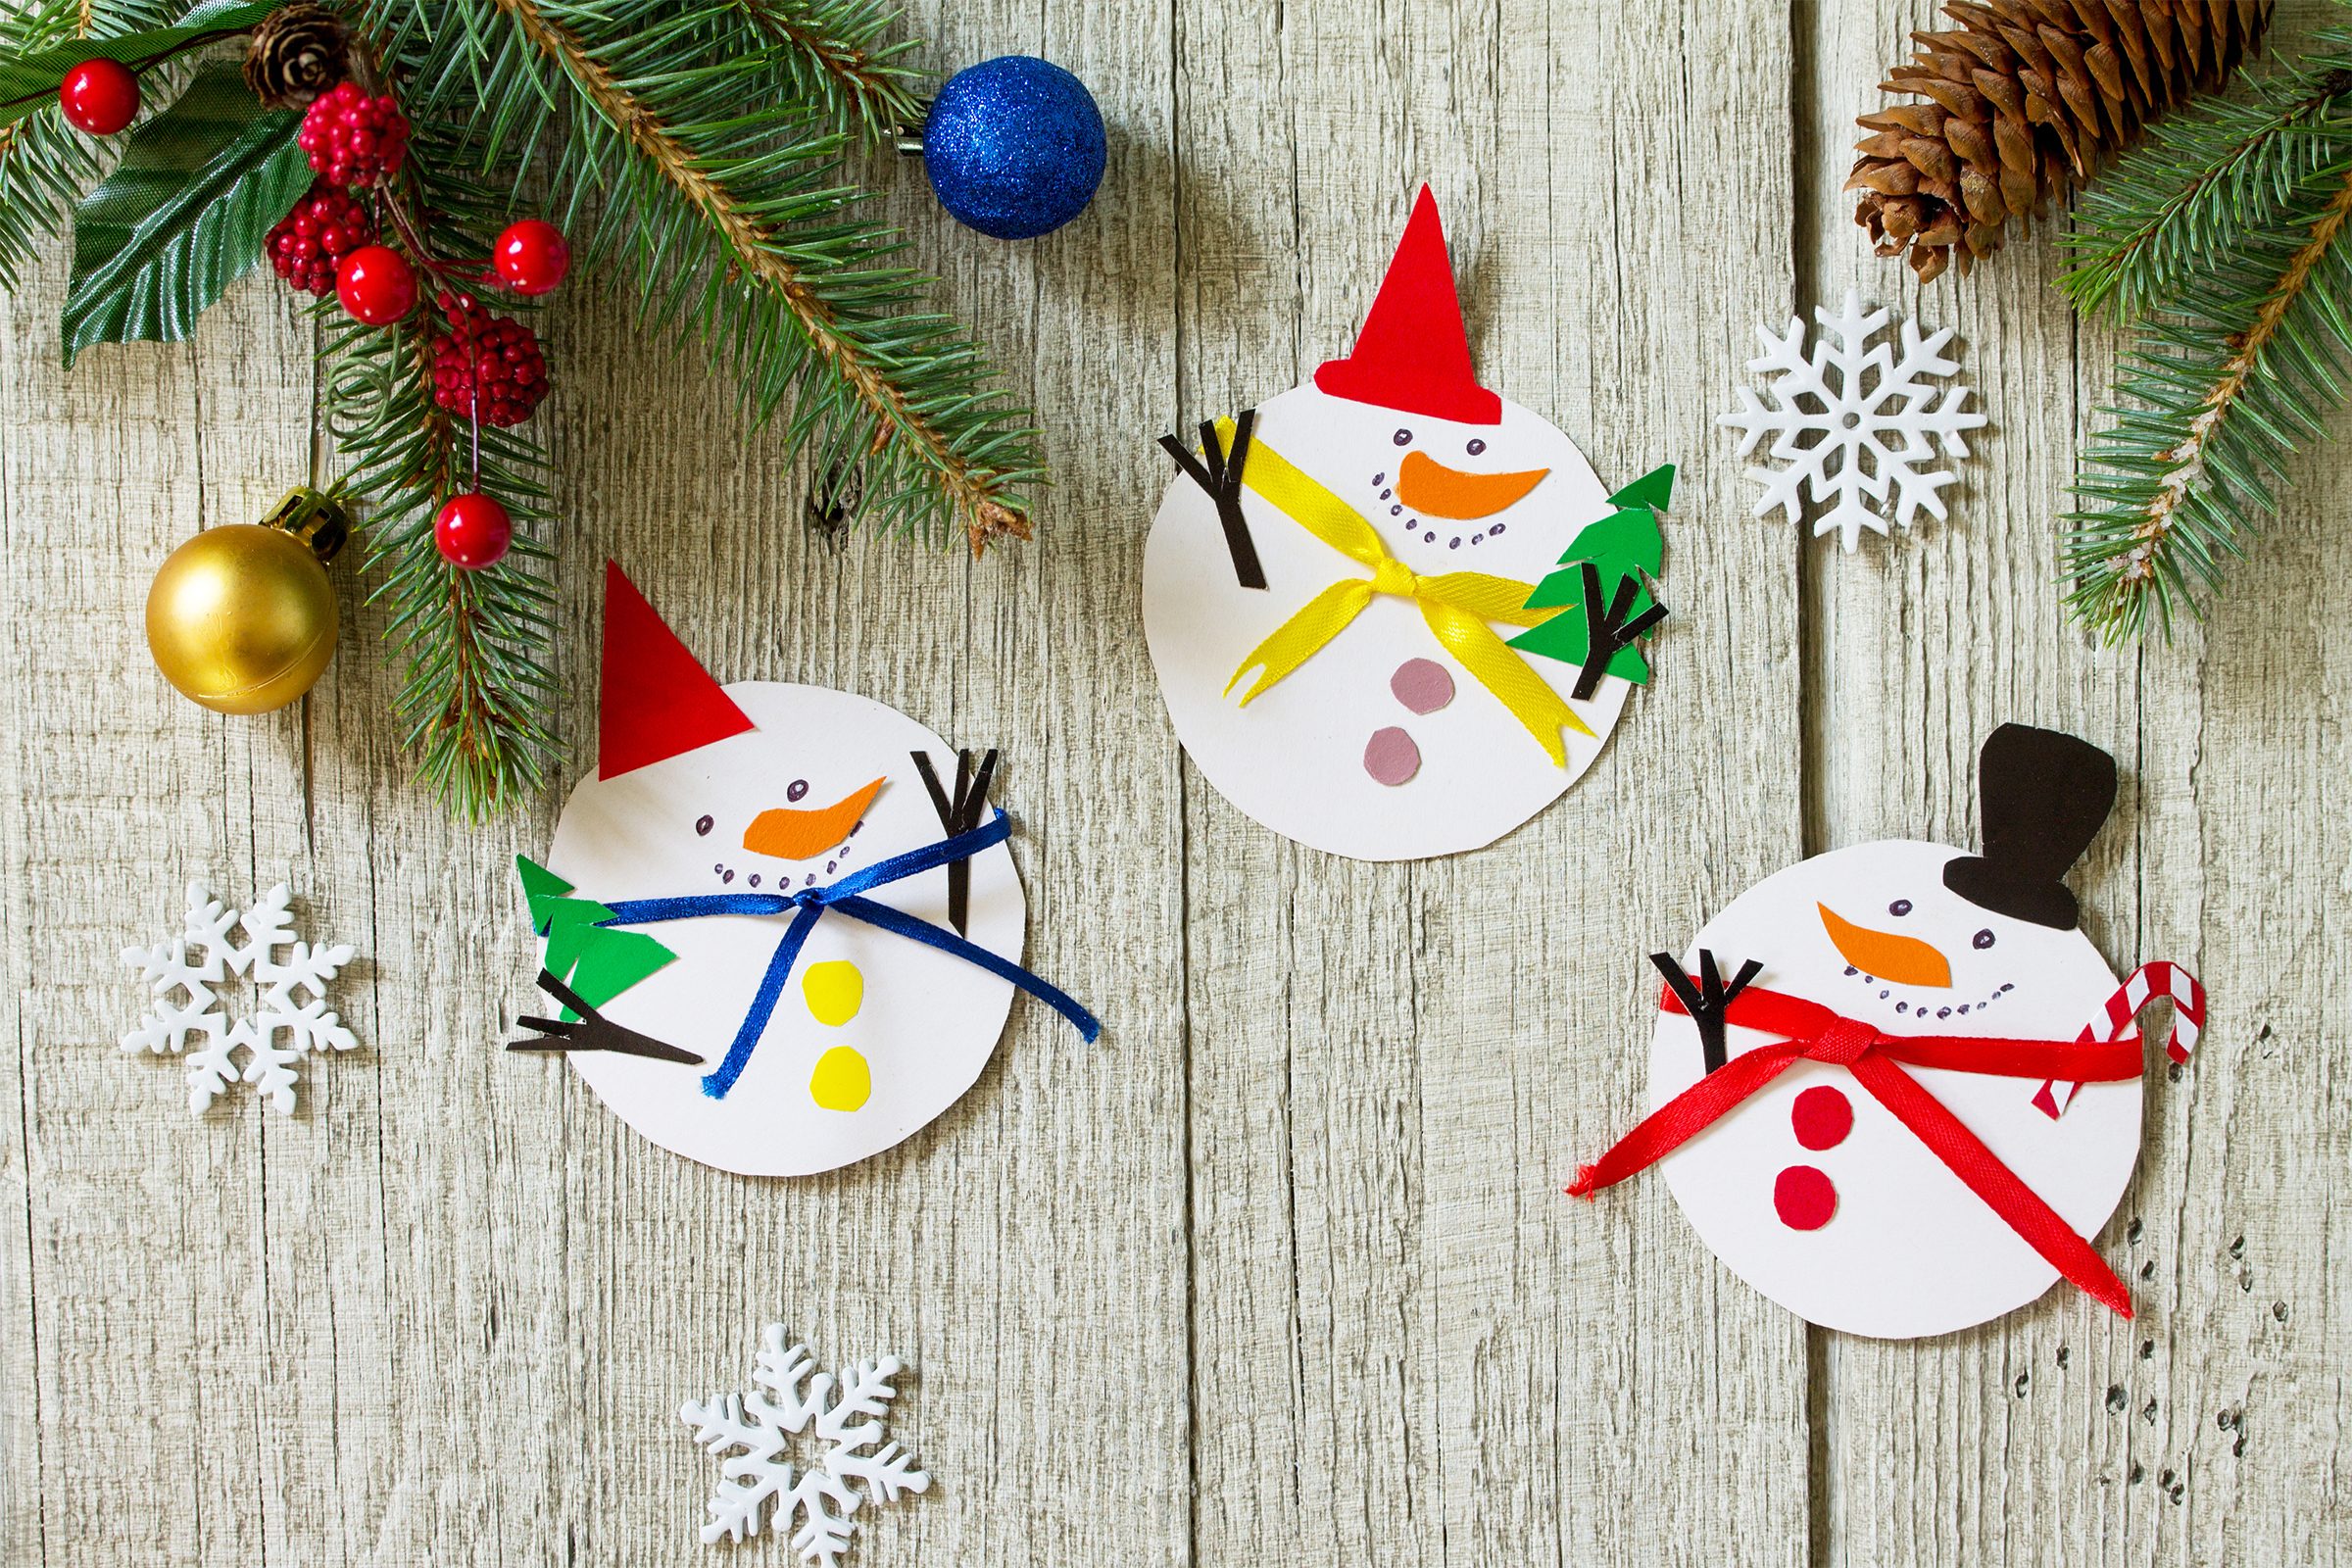 10 Simple and Fun Christmas Crafts for 2 Year Olds! - Sunshine